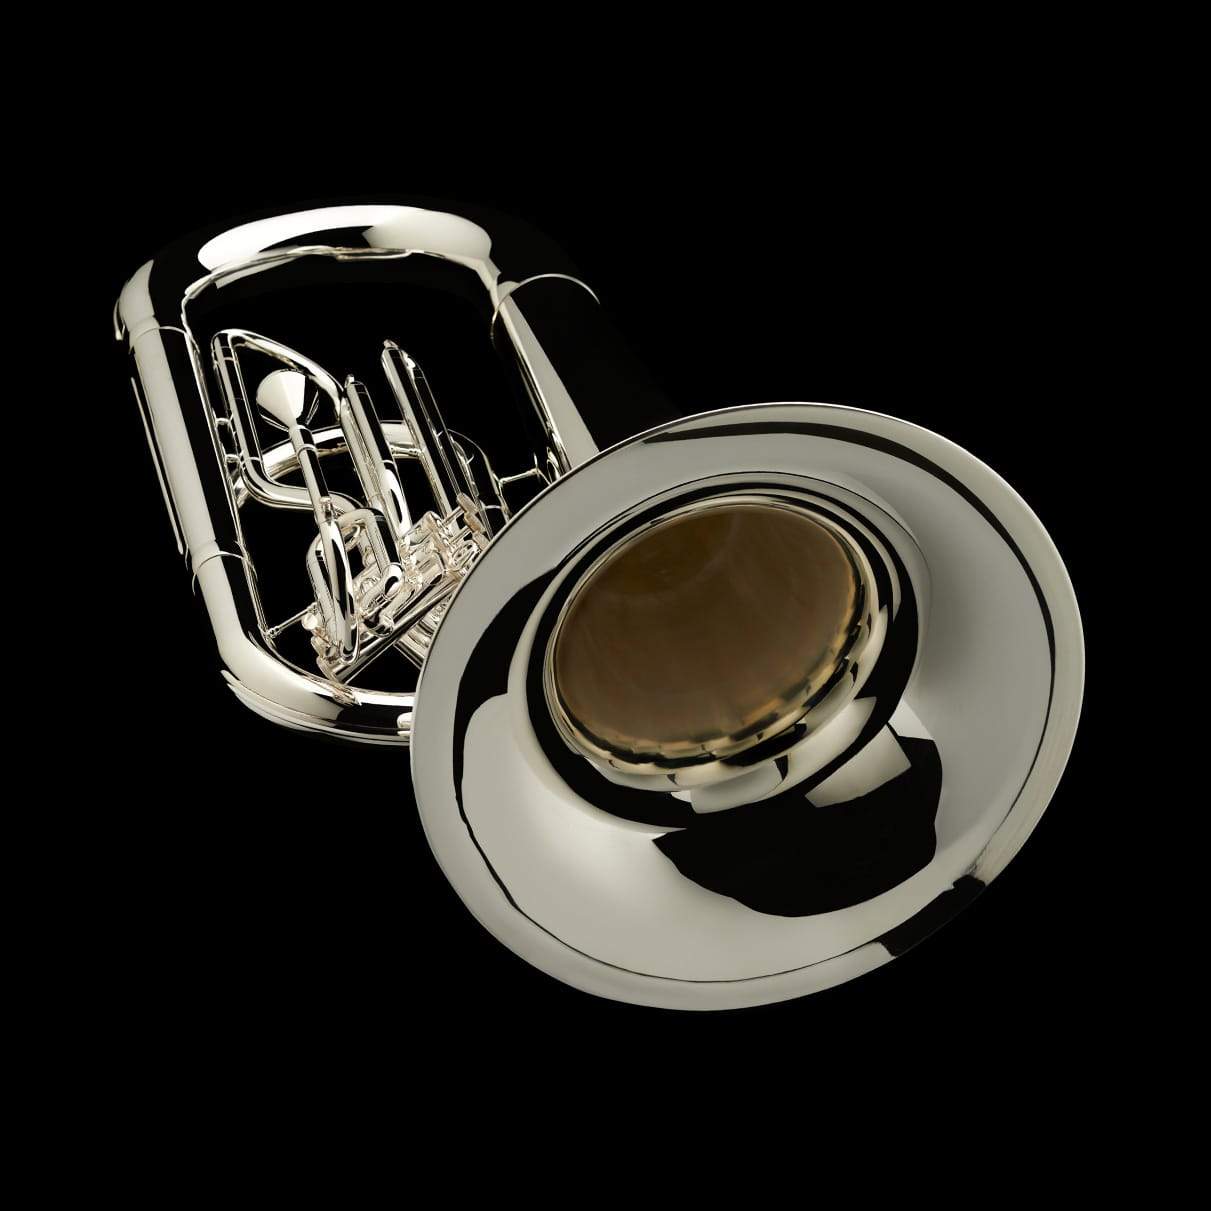 A close up image of the bell of a BBb 4/4 Marching Contra (tuba) in silver from Wessex Tubas